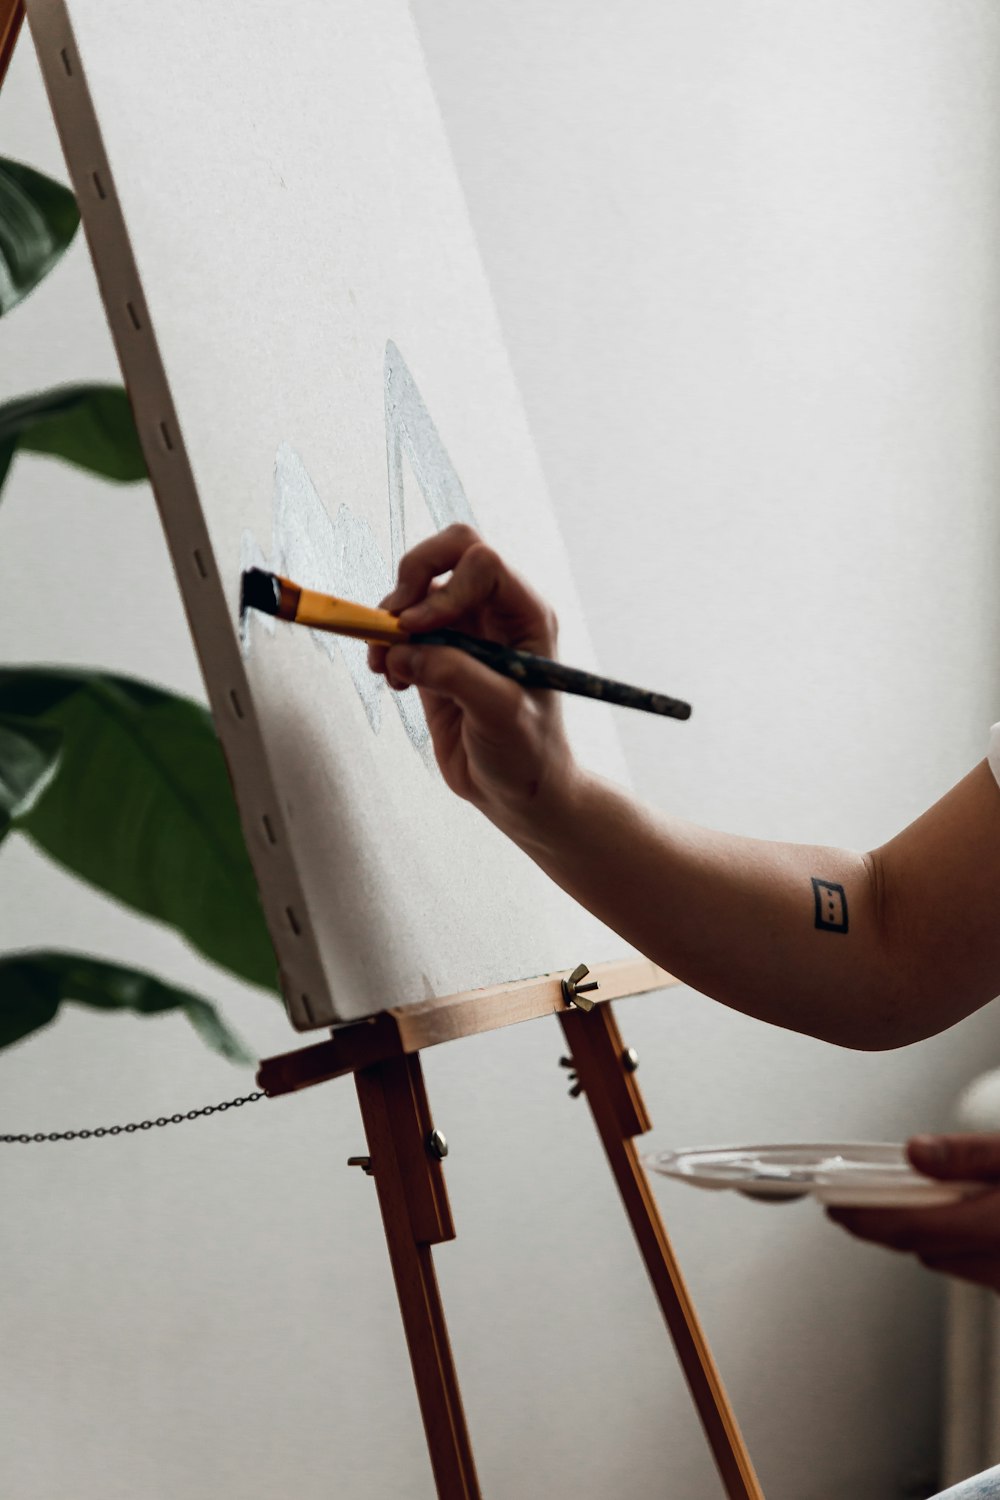 a person holding a paintbrush painting a picture on a easel